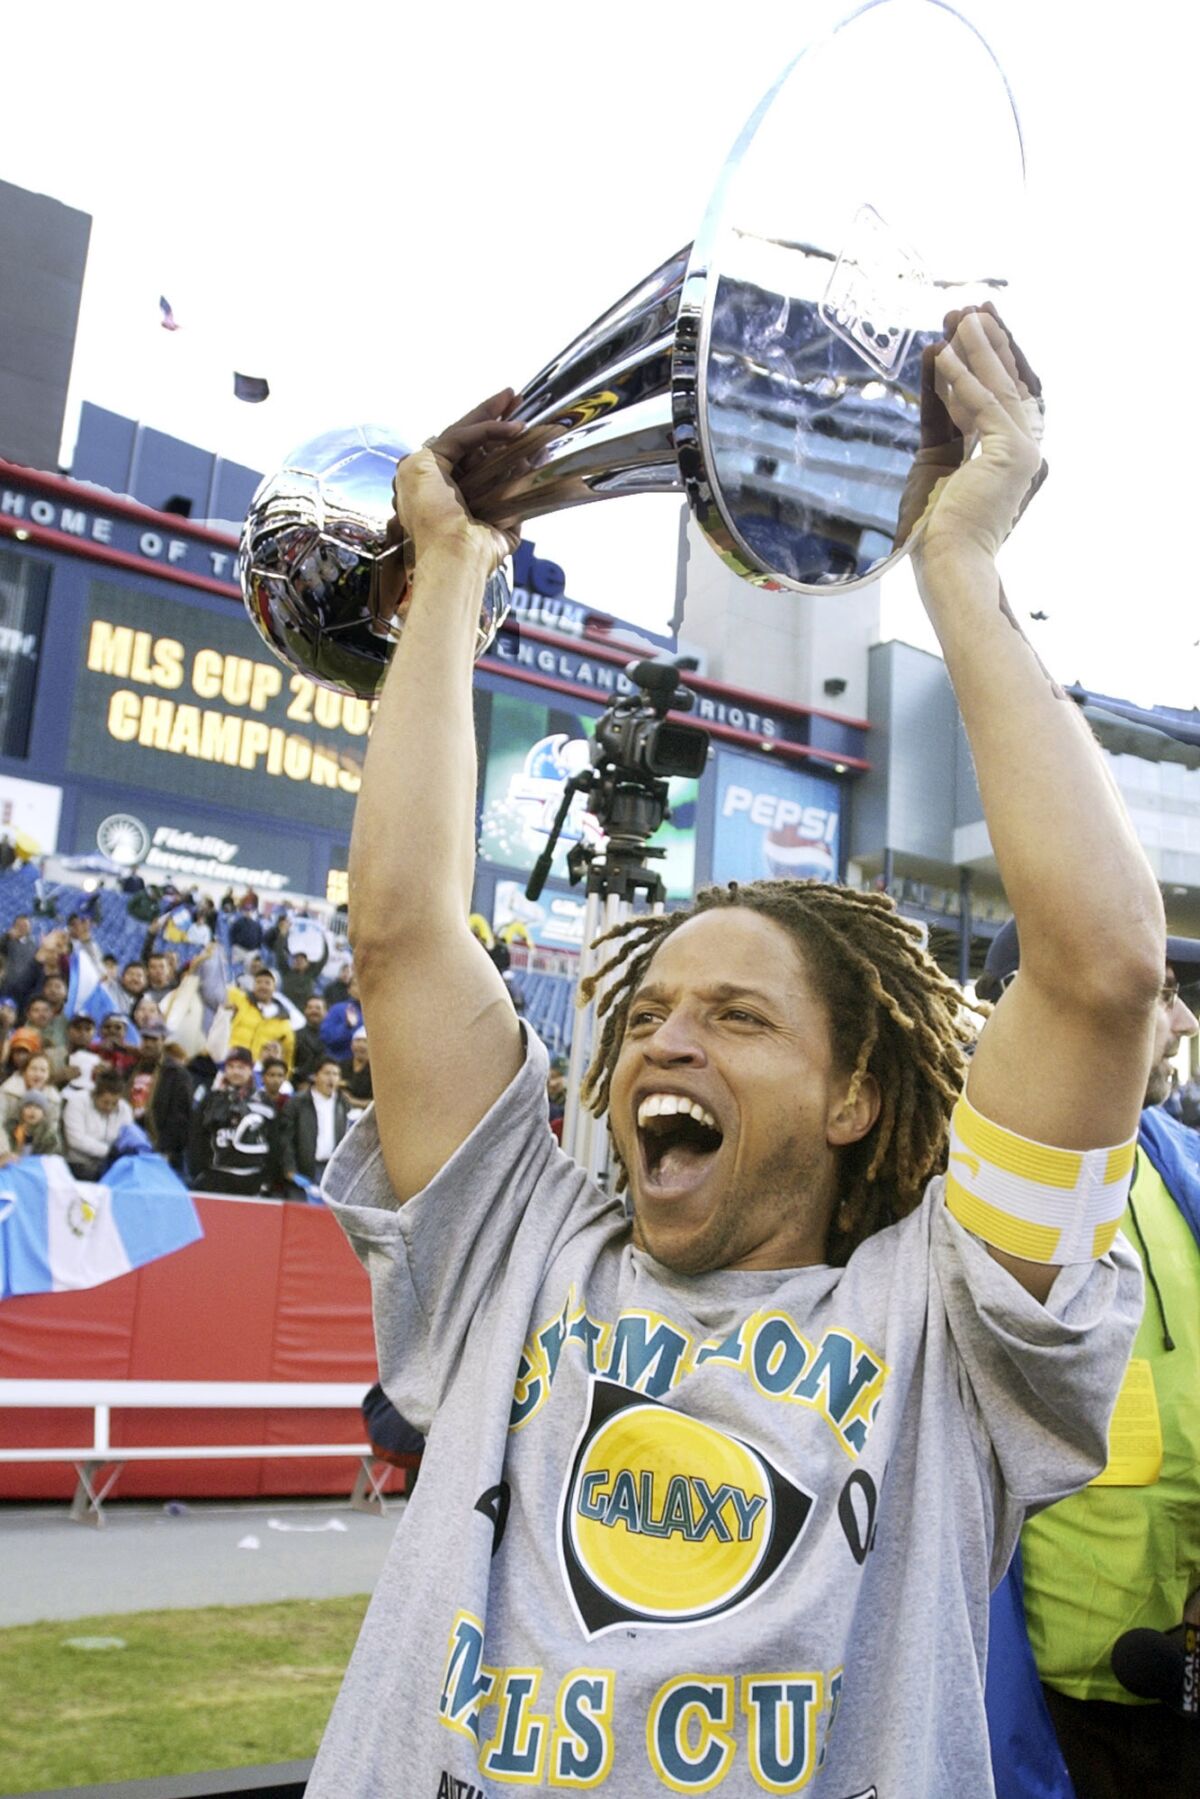 FILE - Los Angeles Galaxy captain Cobi Jones shouts as he holds the MLS Cup aloft after they defeated the New England Revolution, 1-0, in overtime at Gillette Stadium in Foxboro, Mass., in this Sunday Oct. 20, 2002, file photo. Jones, one of the league's original players who spent his entire 11-year career with the Galaxy, was named one of the MLS 25 Greatest on Wednesday, Dec. 9, 2020. His favorite moment in his 11 MLS seasons is winning that first league title with the Galaxy. (AP Photo/Elise Amendola, File)